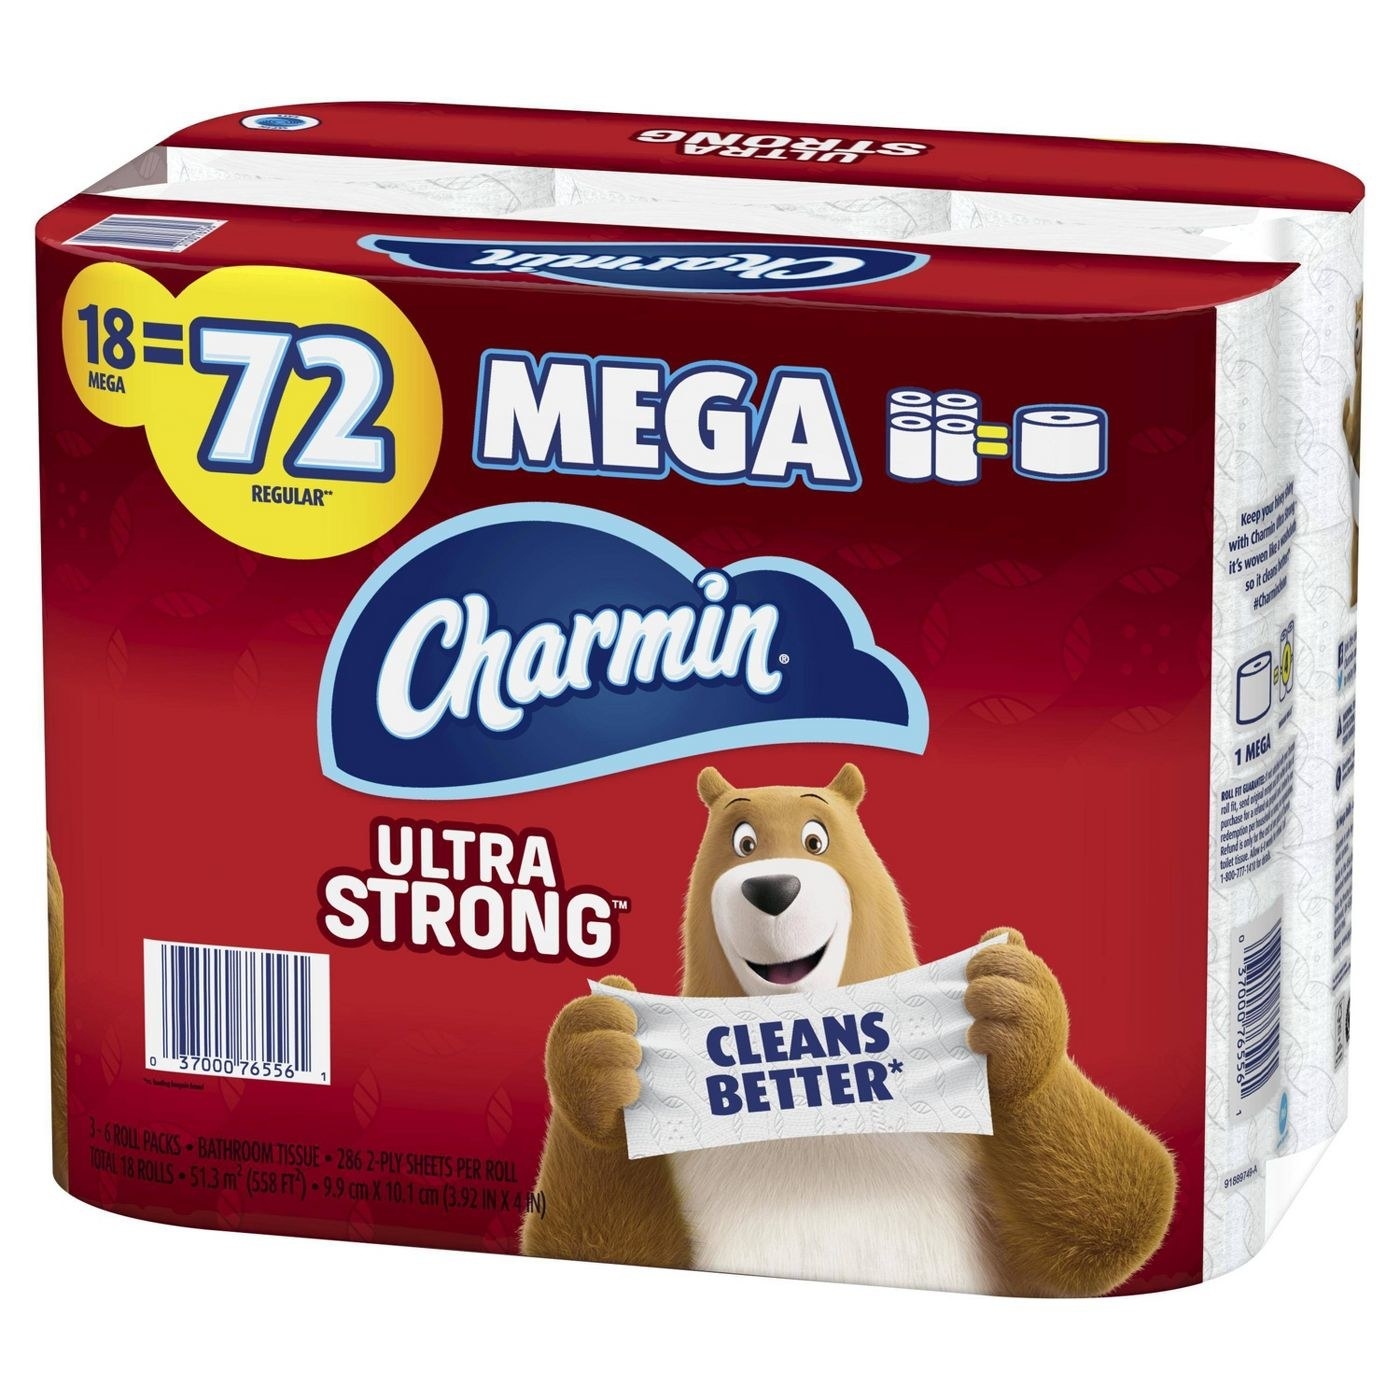 the pack of Charmin